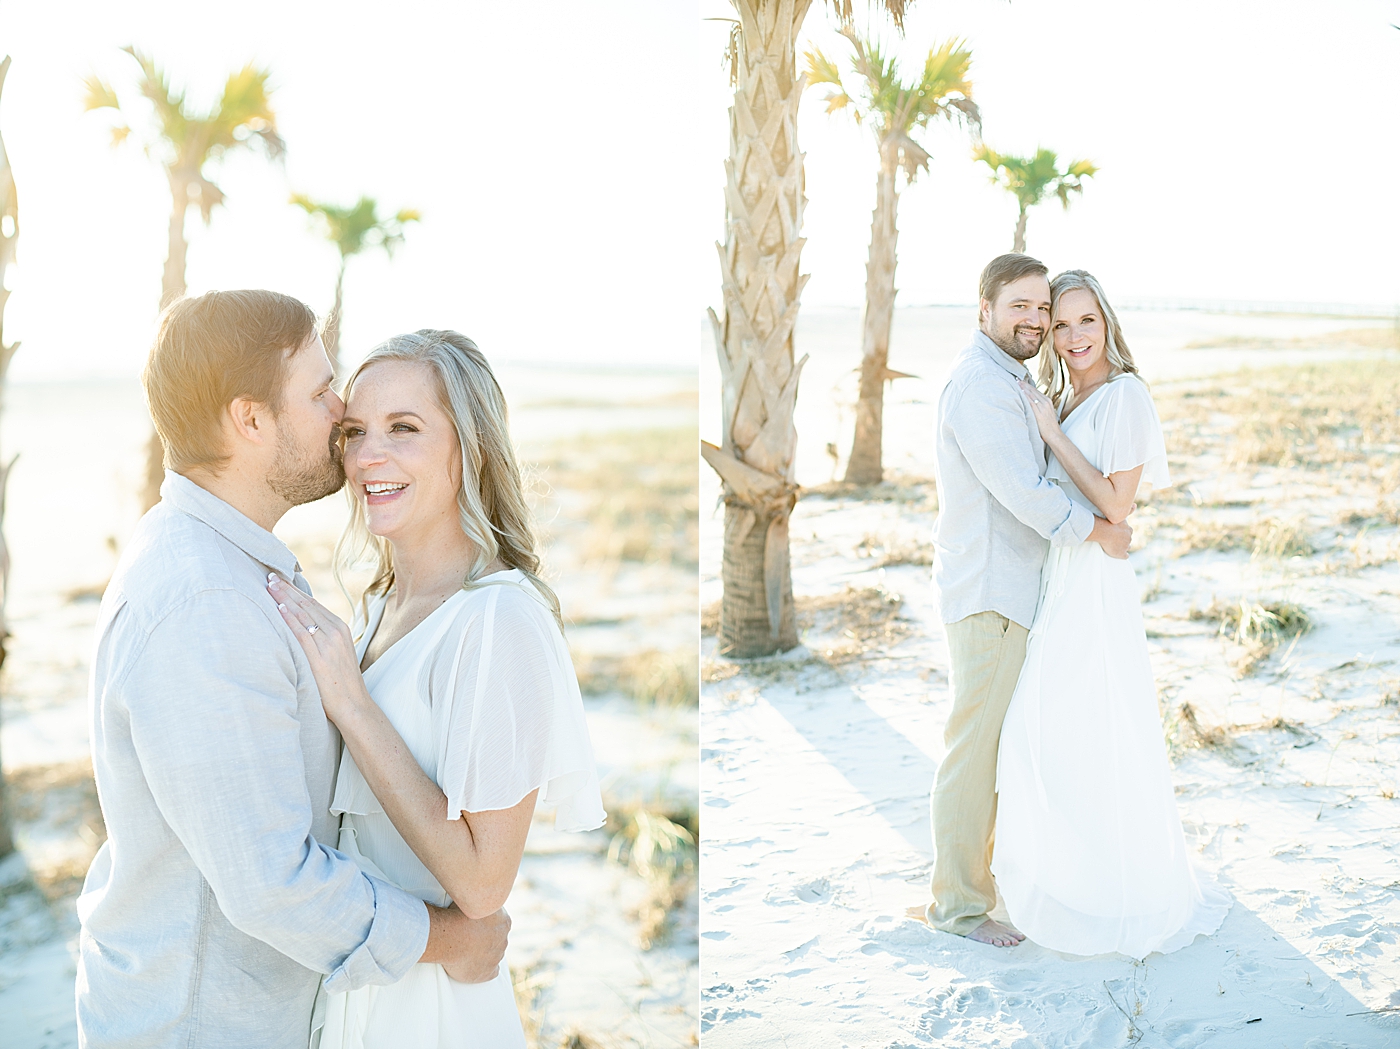 Couple celebrates anniversary on the beach with family photoshoot. Photo by Little Sunshine Photography.